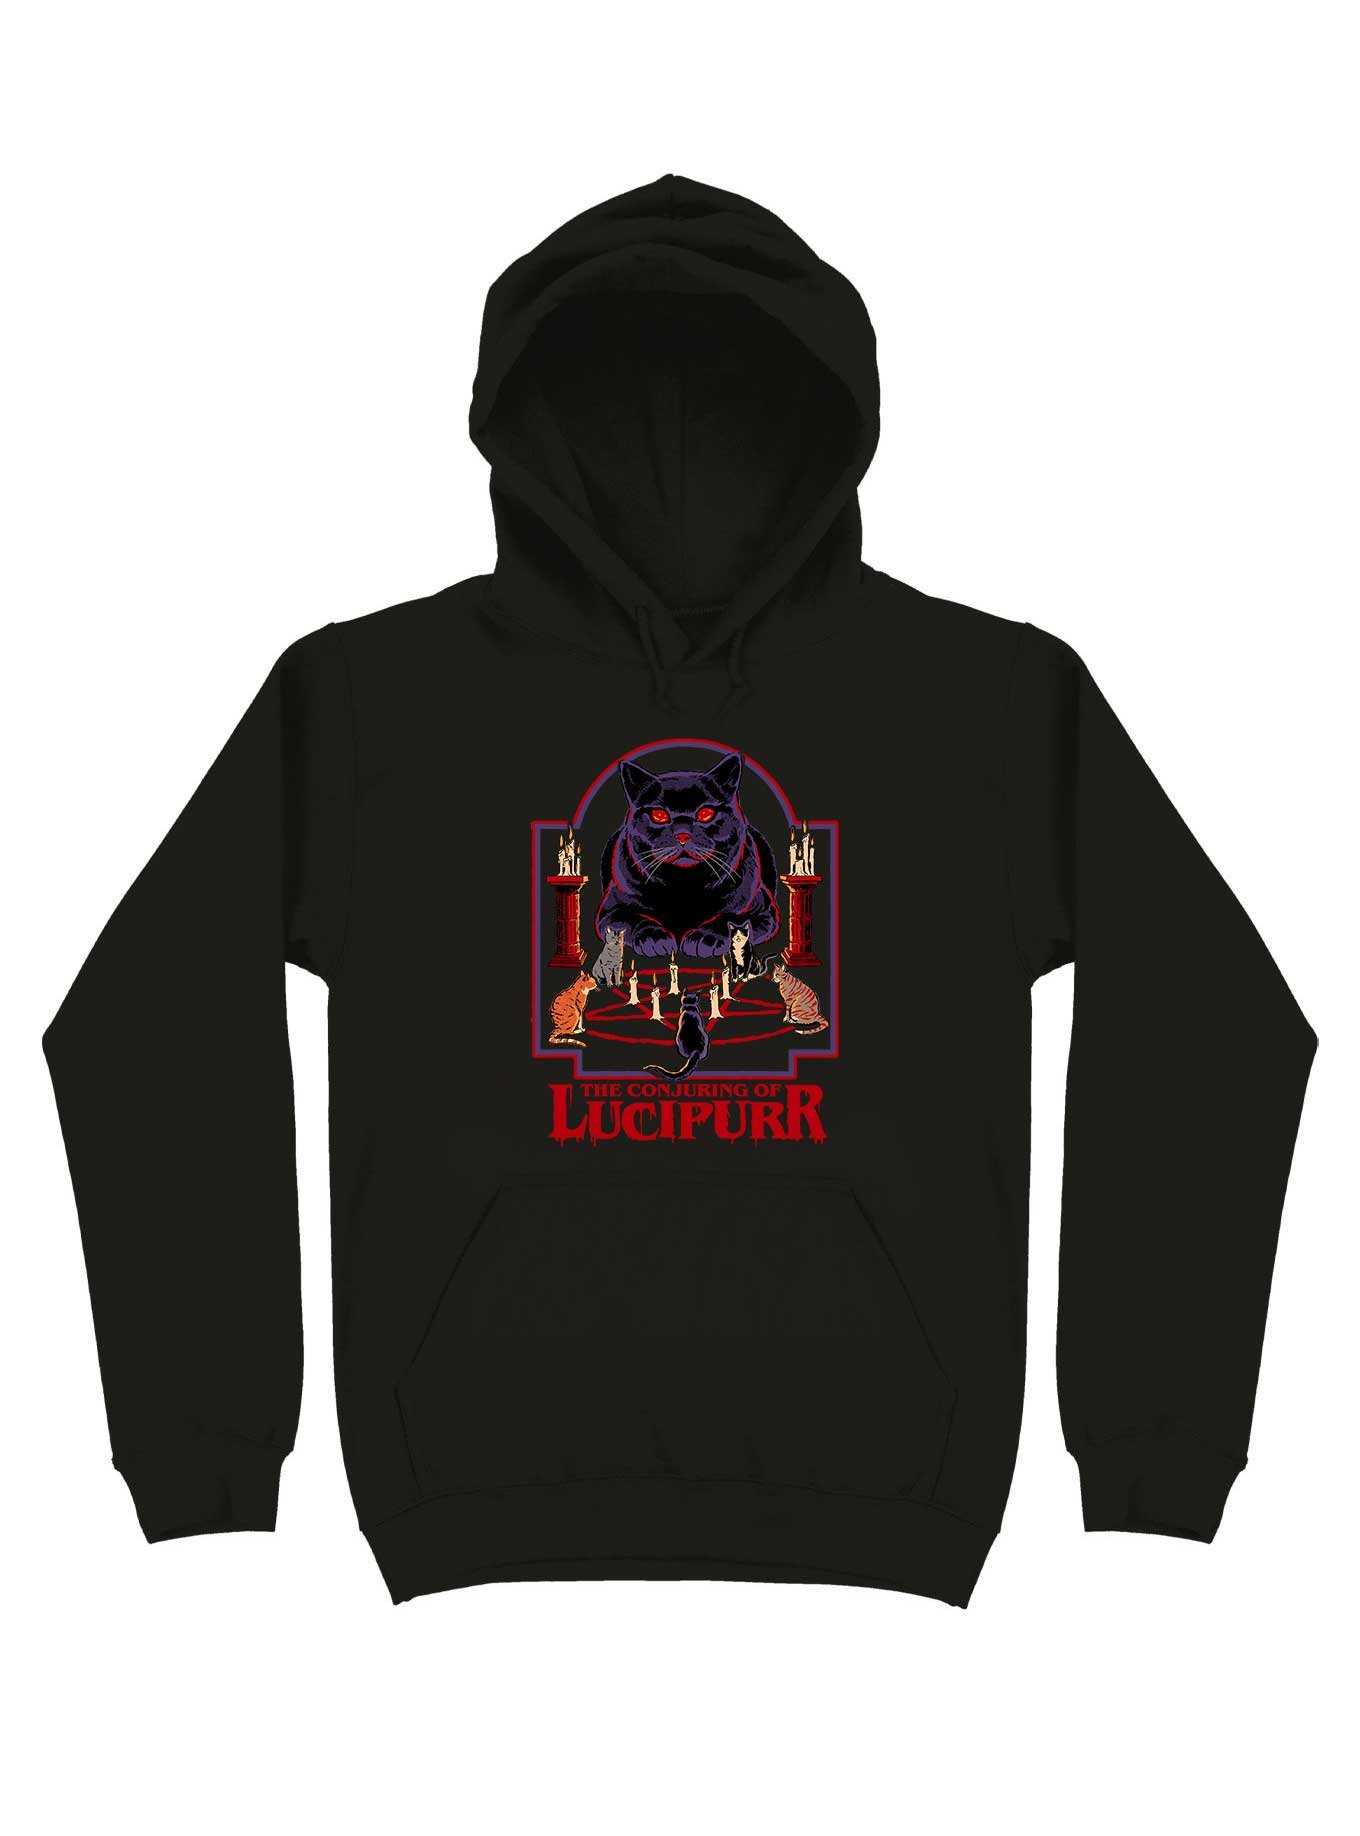 The Conjuring of Lucipurr Hoodie By Steven Rhodes, , hi-res